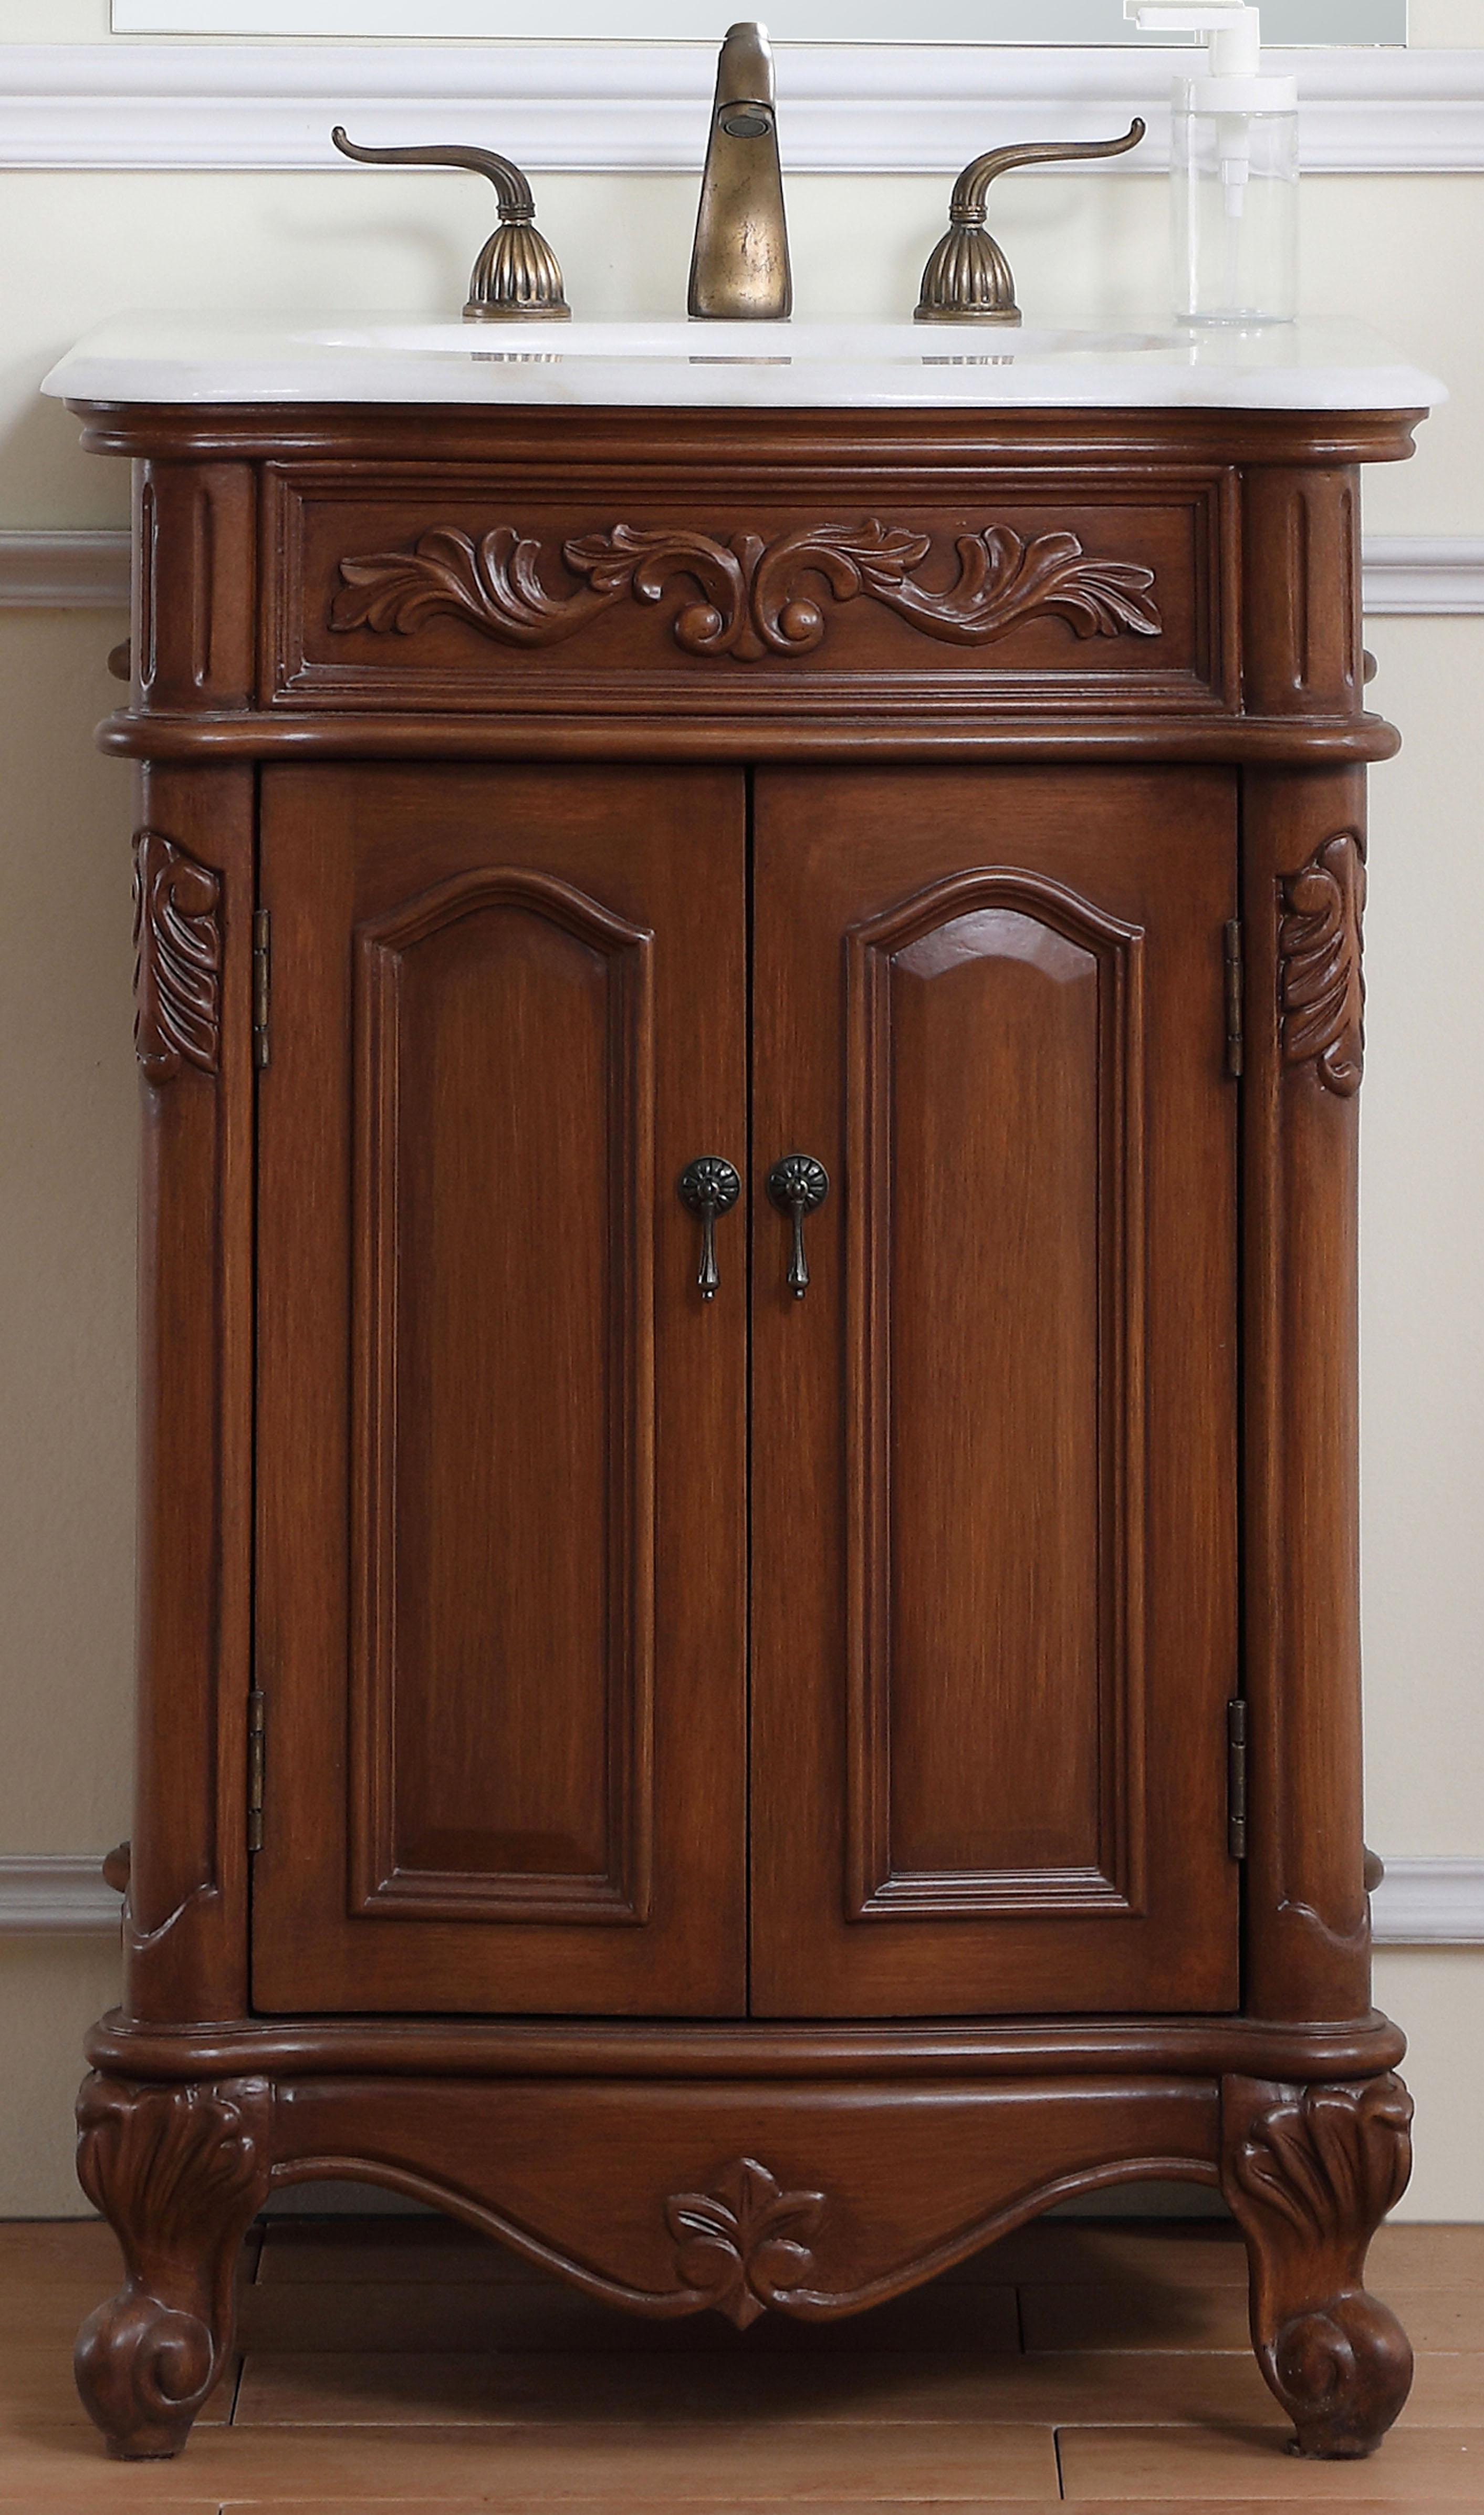 24" Deep Chestnut Finish Vanity with Victorian Style Legs